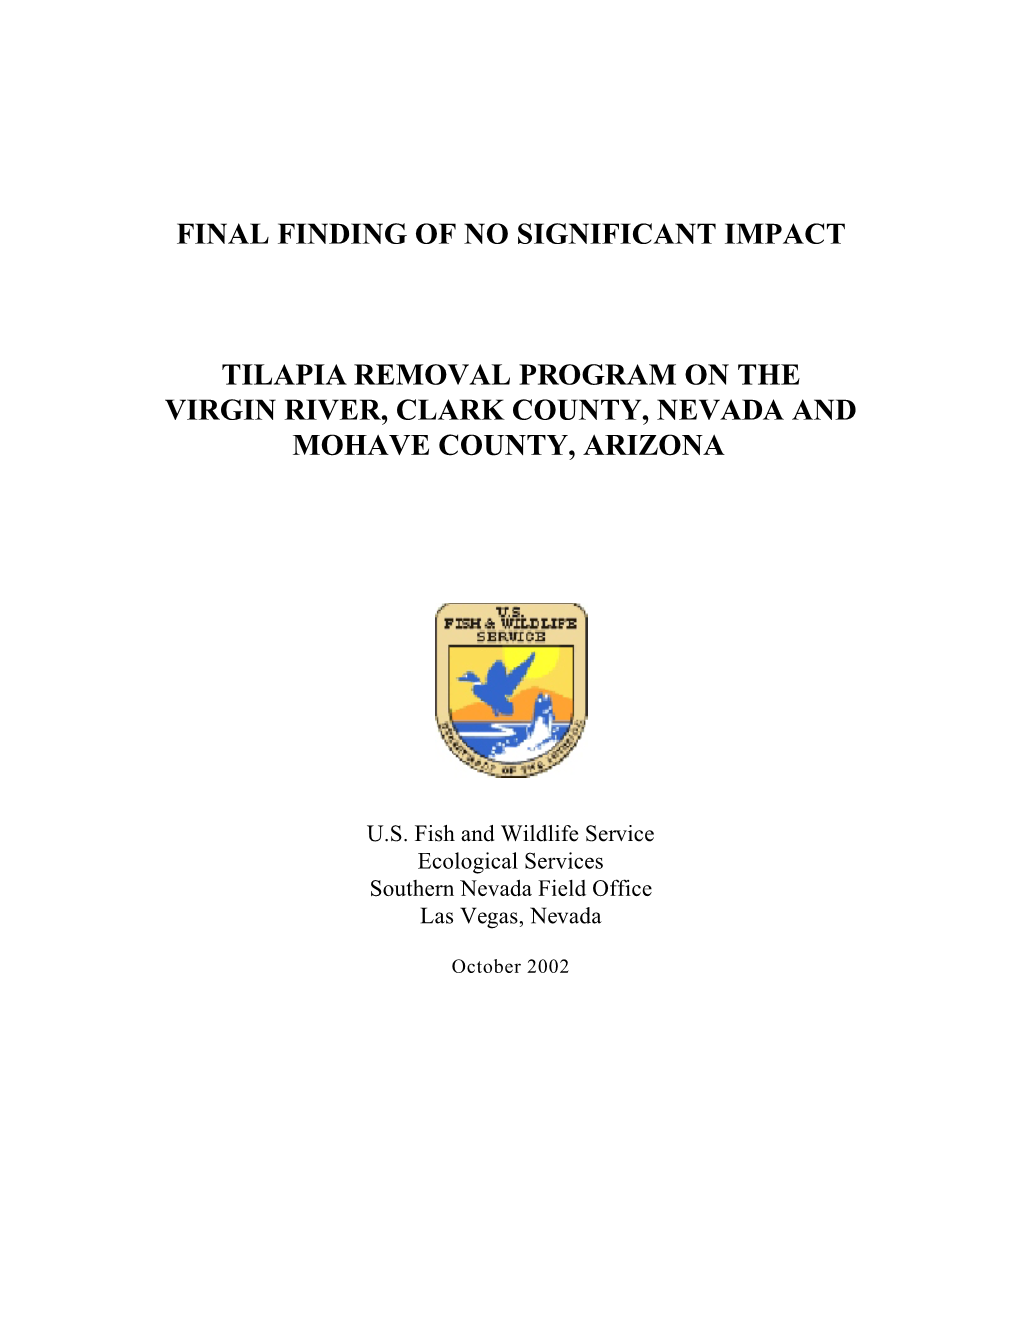 Final Finding of No Significant Impact Tilapia Removal